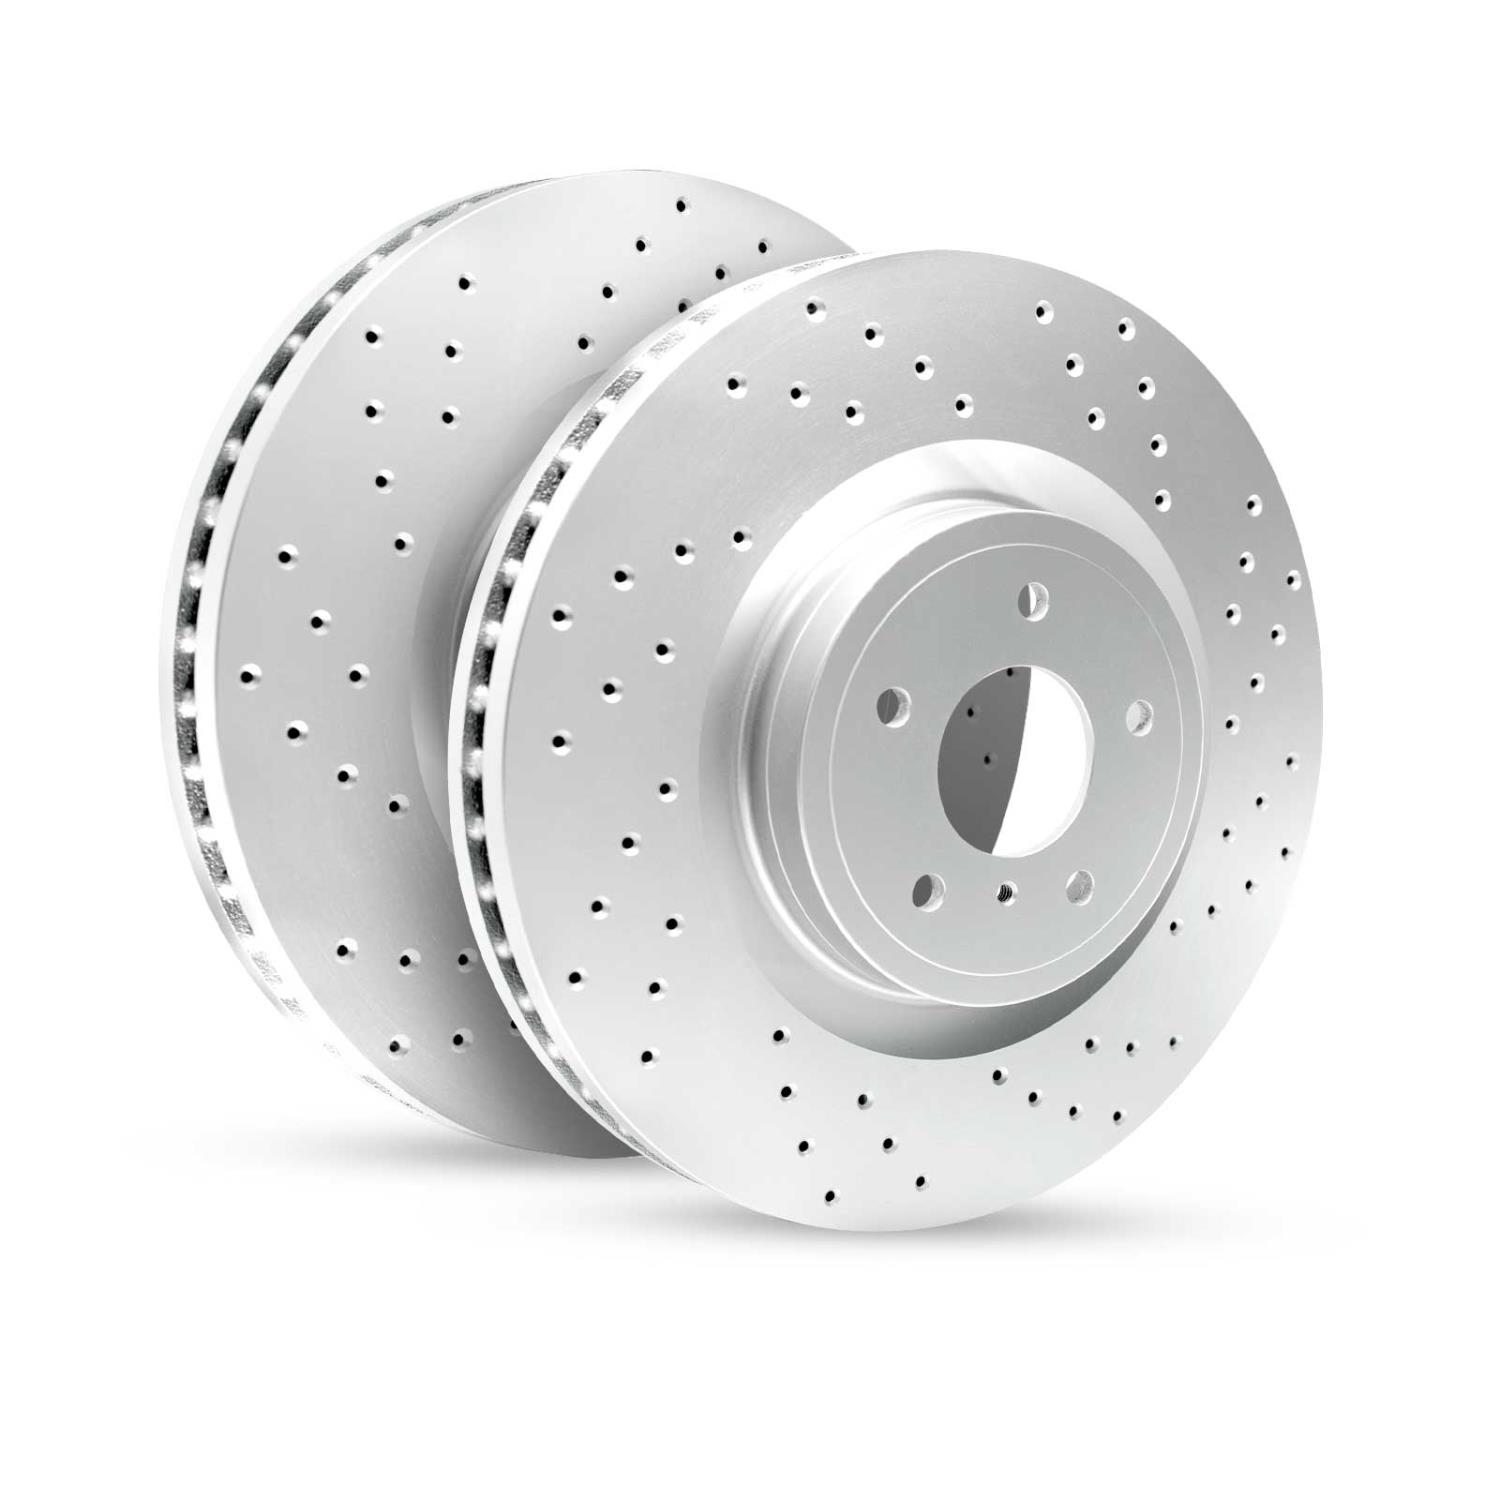 GEO-Carbon Drilled/Slotted Rotors, 2014-2020 Acura/Honda, Position: Rear